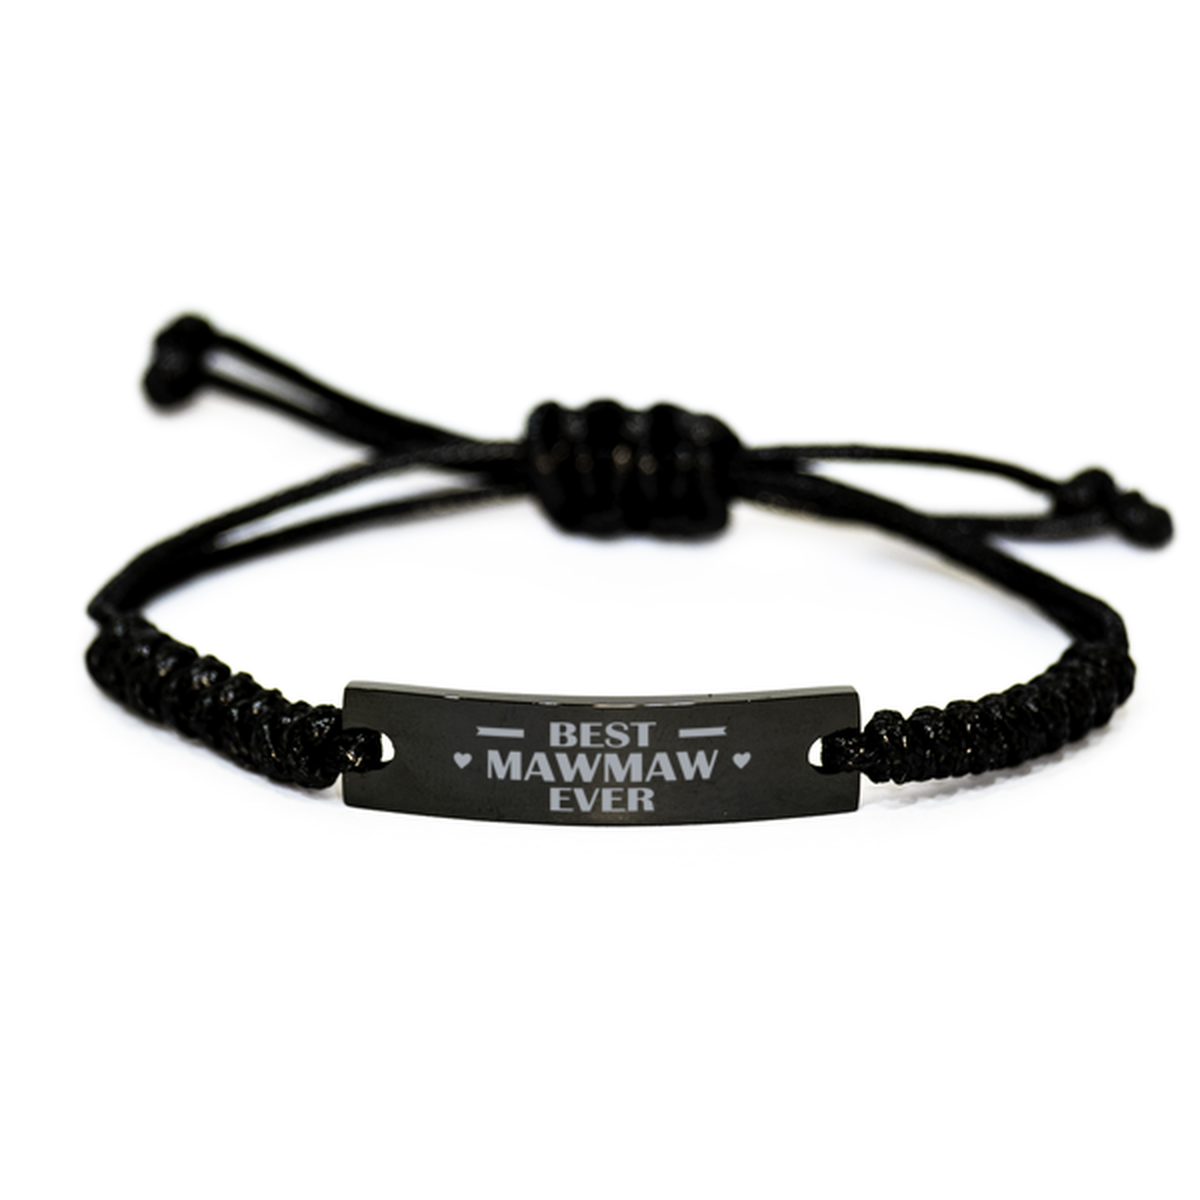 Best Mawmaw Ever Mawmaw Gifts, Funny Engraved Rope Bracelet For Mawmaw, Birthday Family Gifts For Women